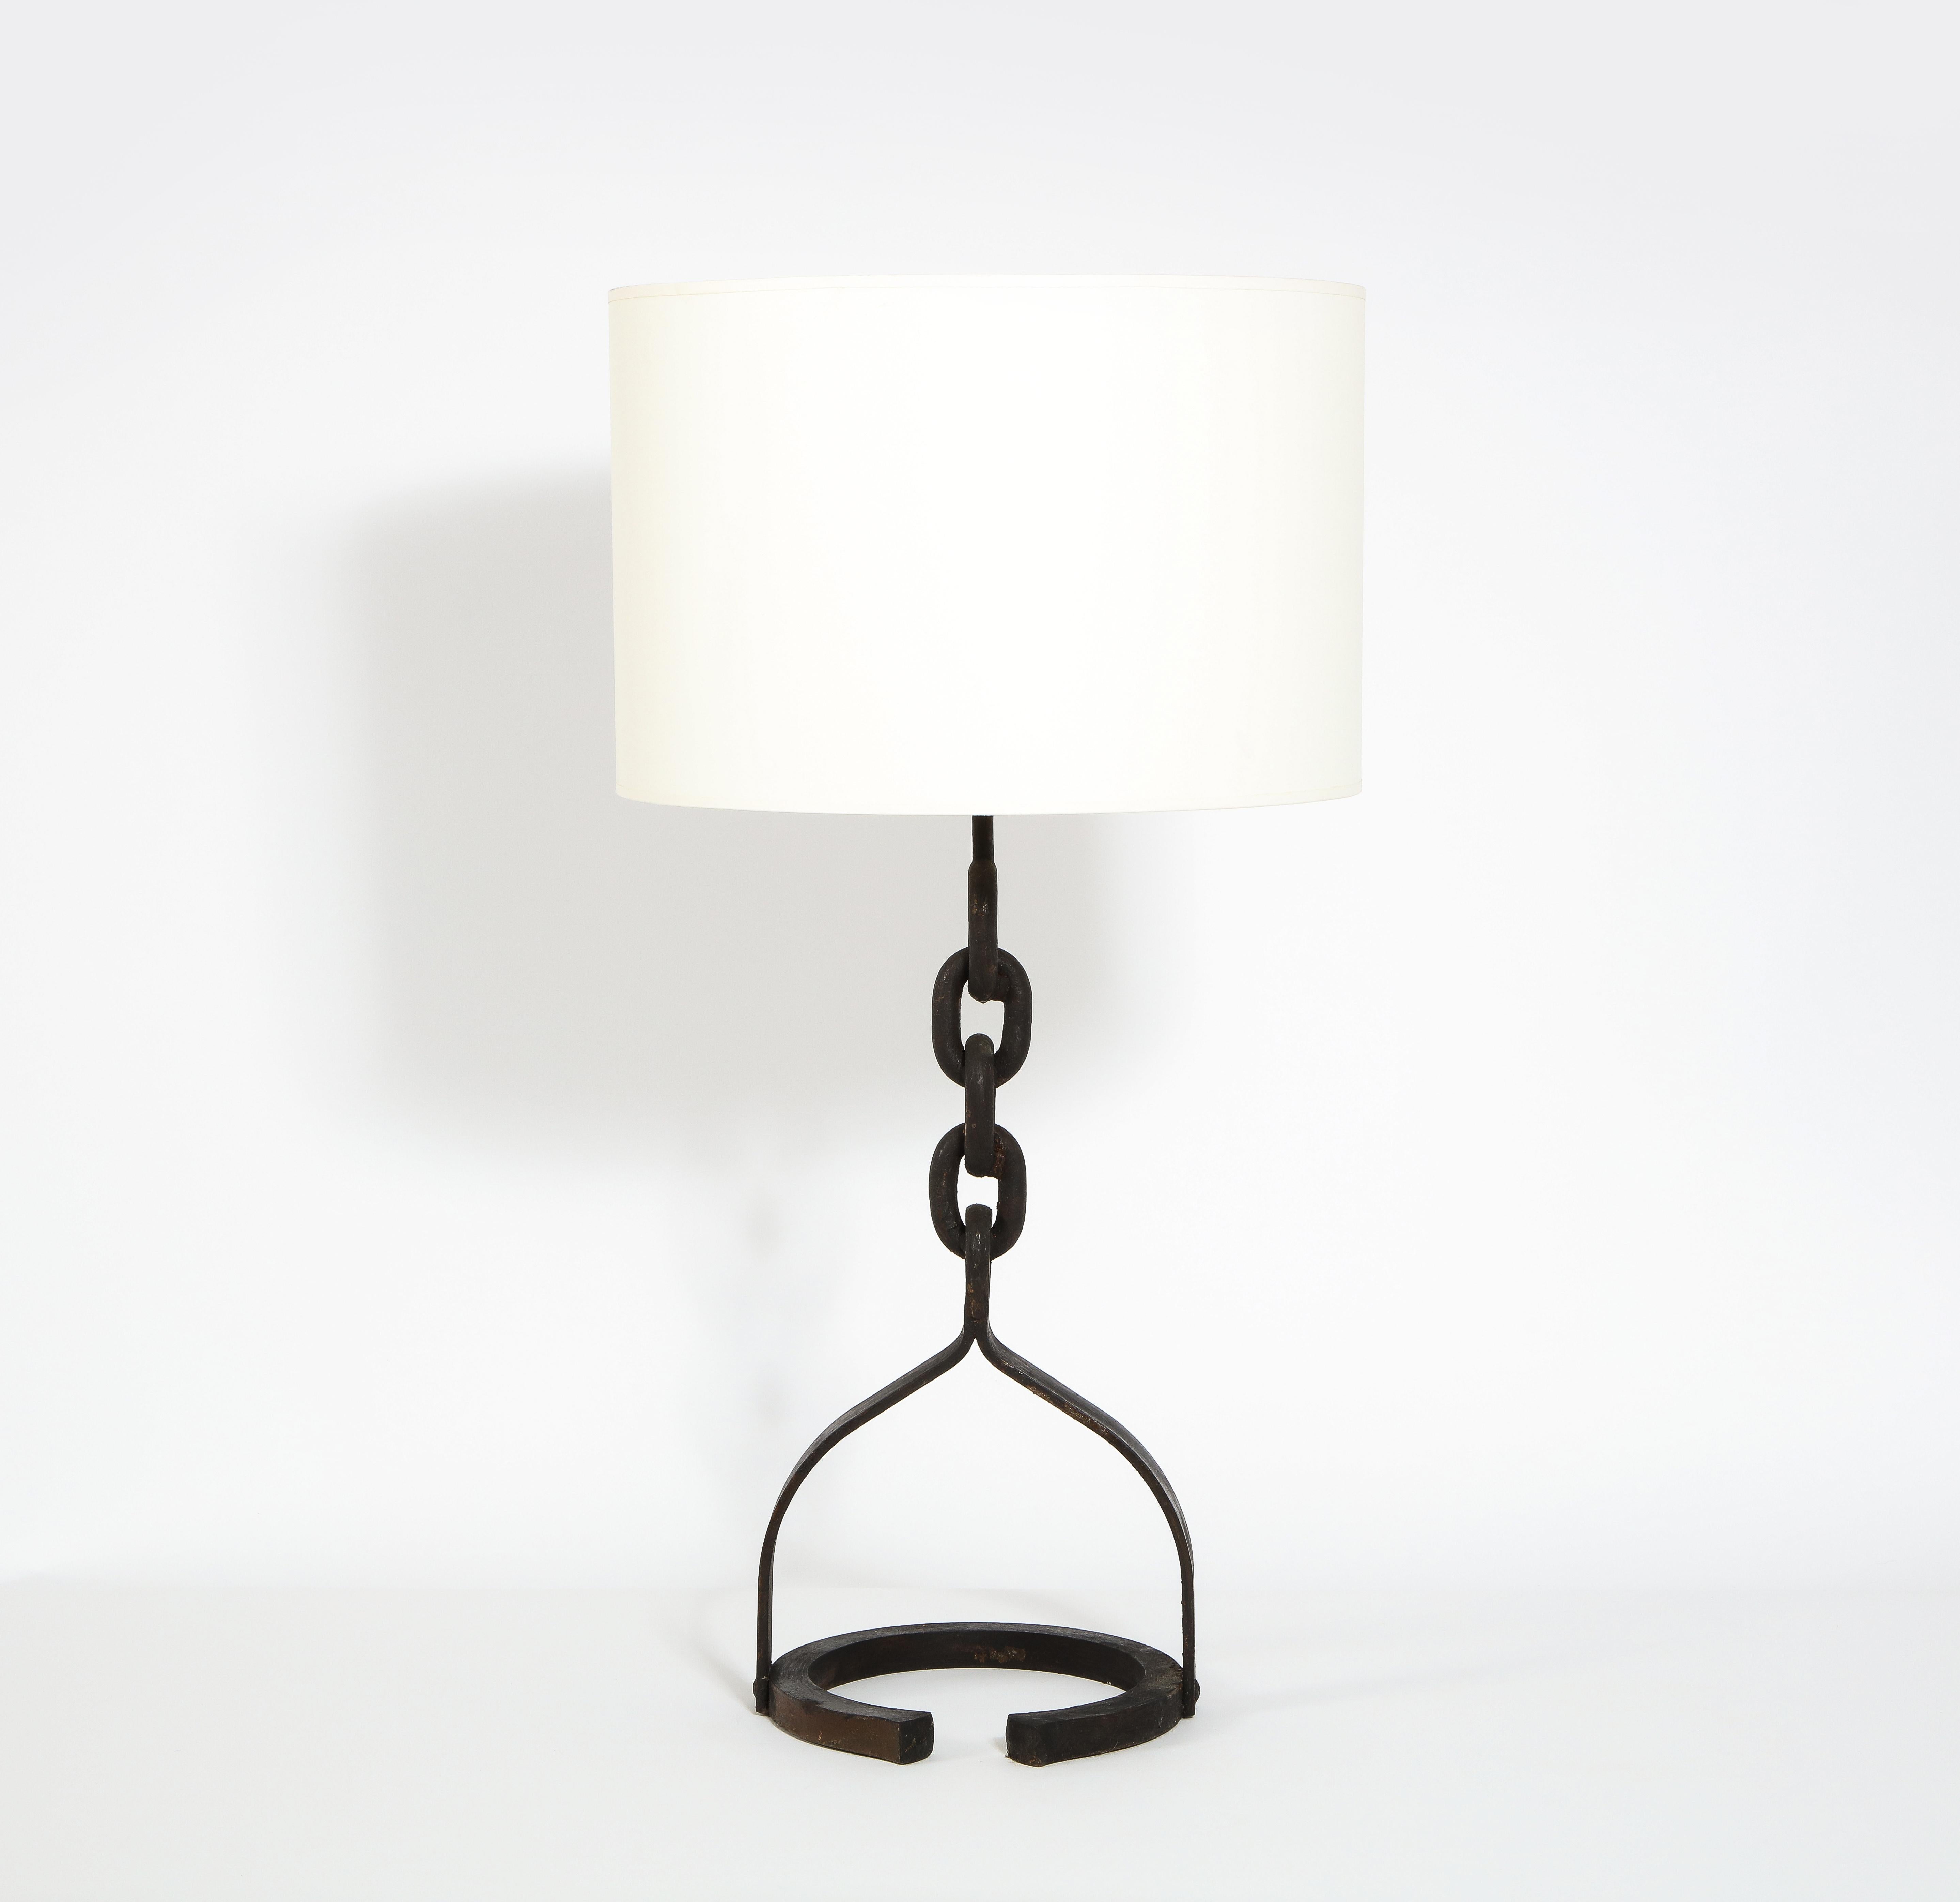 A wrought iron table lamp made of welded chain links on a half-round base. Shade not included.

Also available, floor lamp version of same.